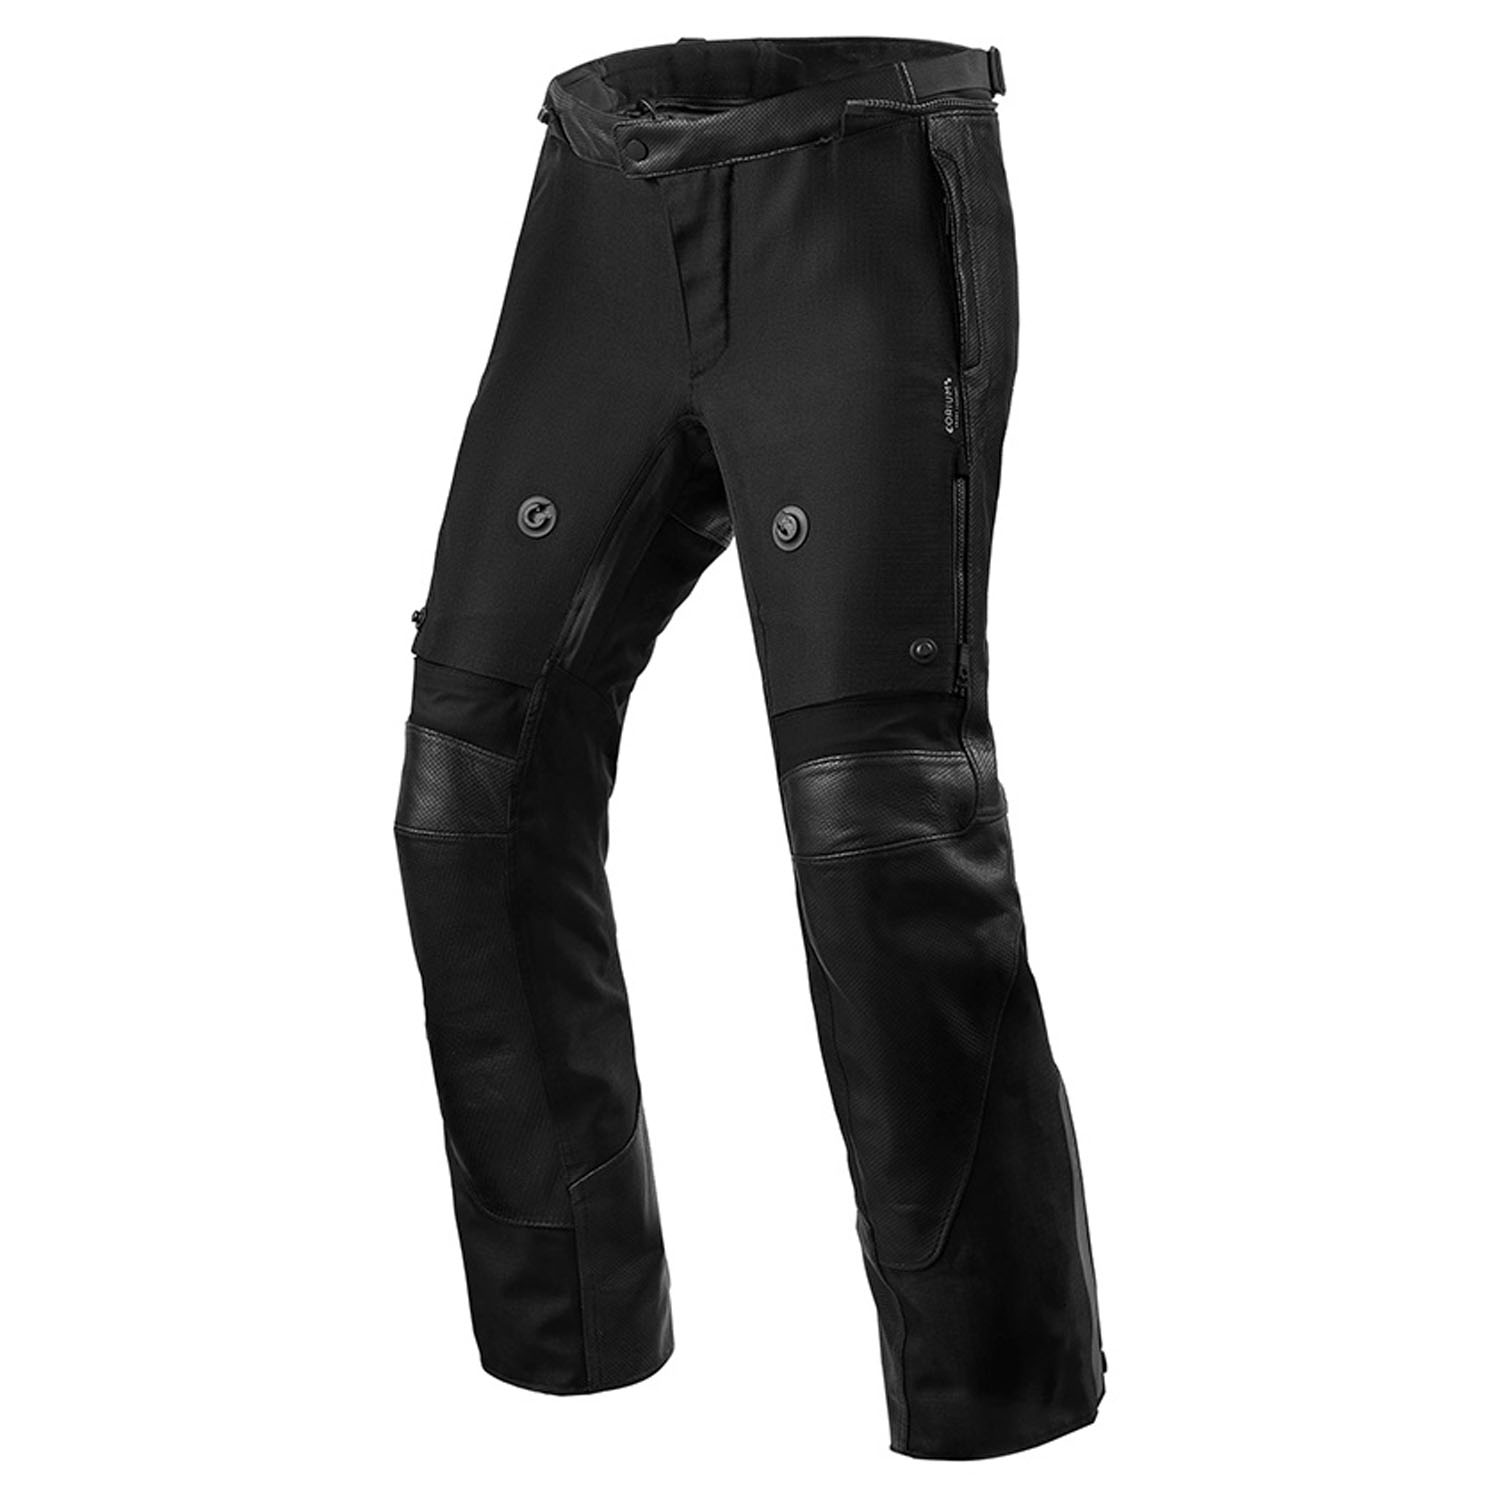 Image of REV'IT! Trousers Valve H2O Black Long Motorcycle Pants Taille 50